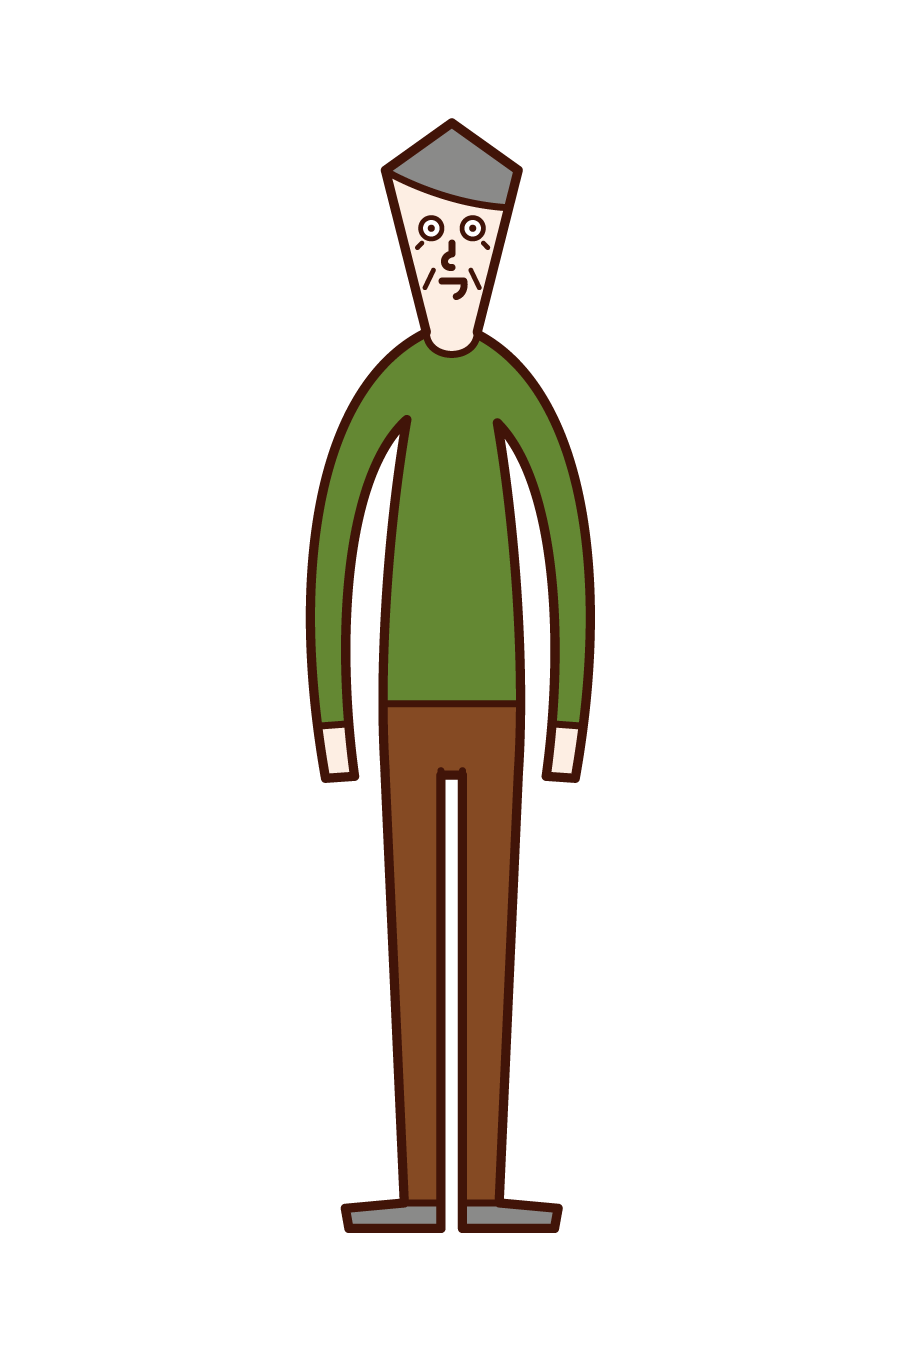 Illustration of an upright person (old man)